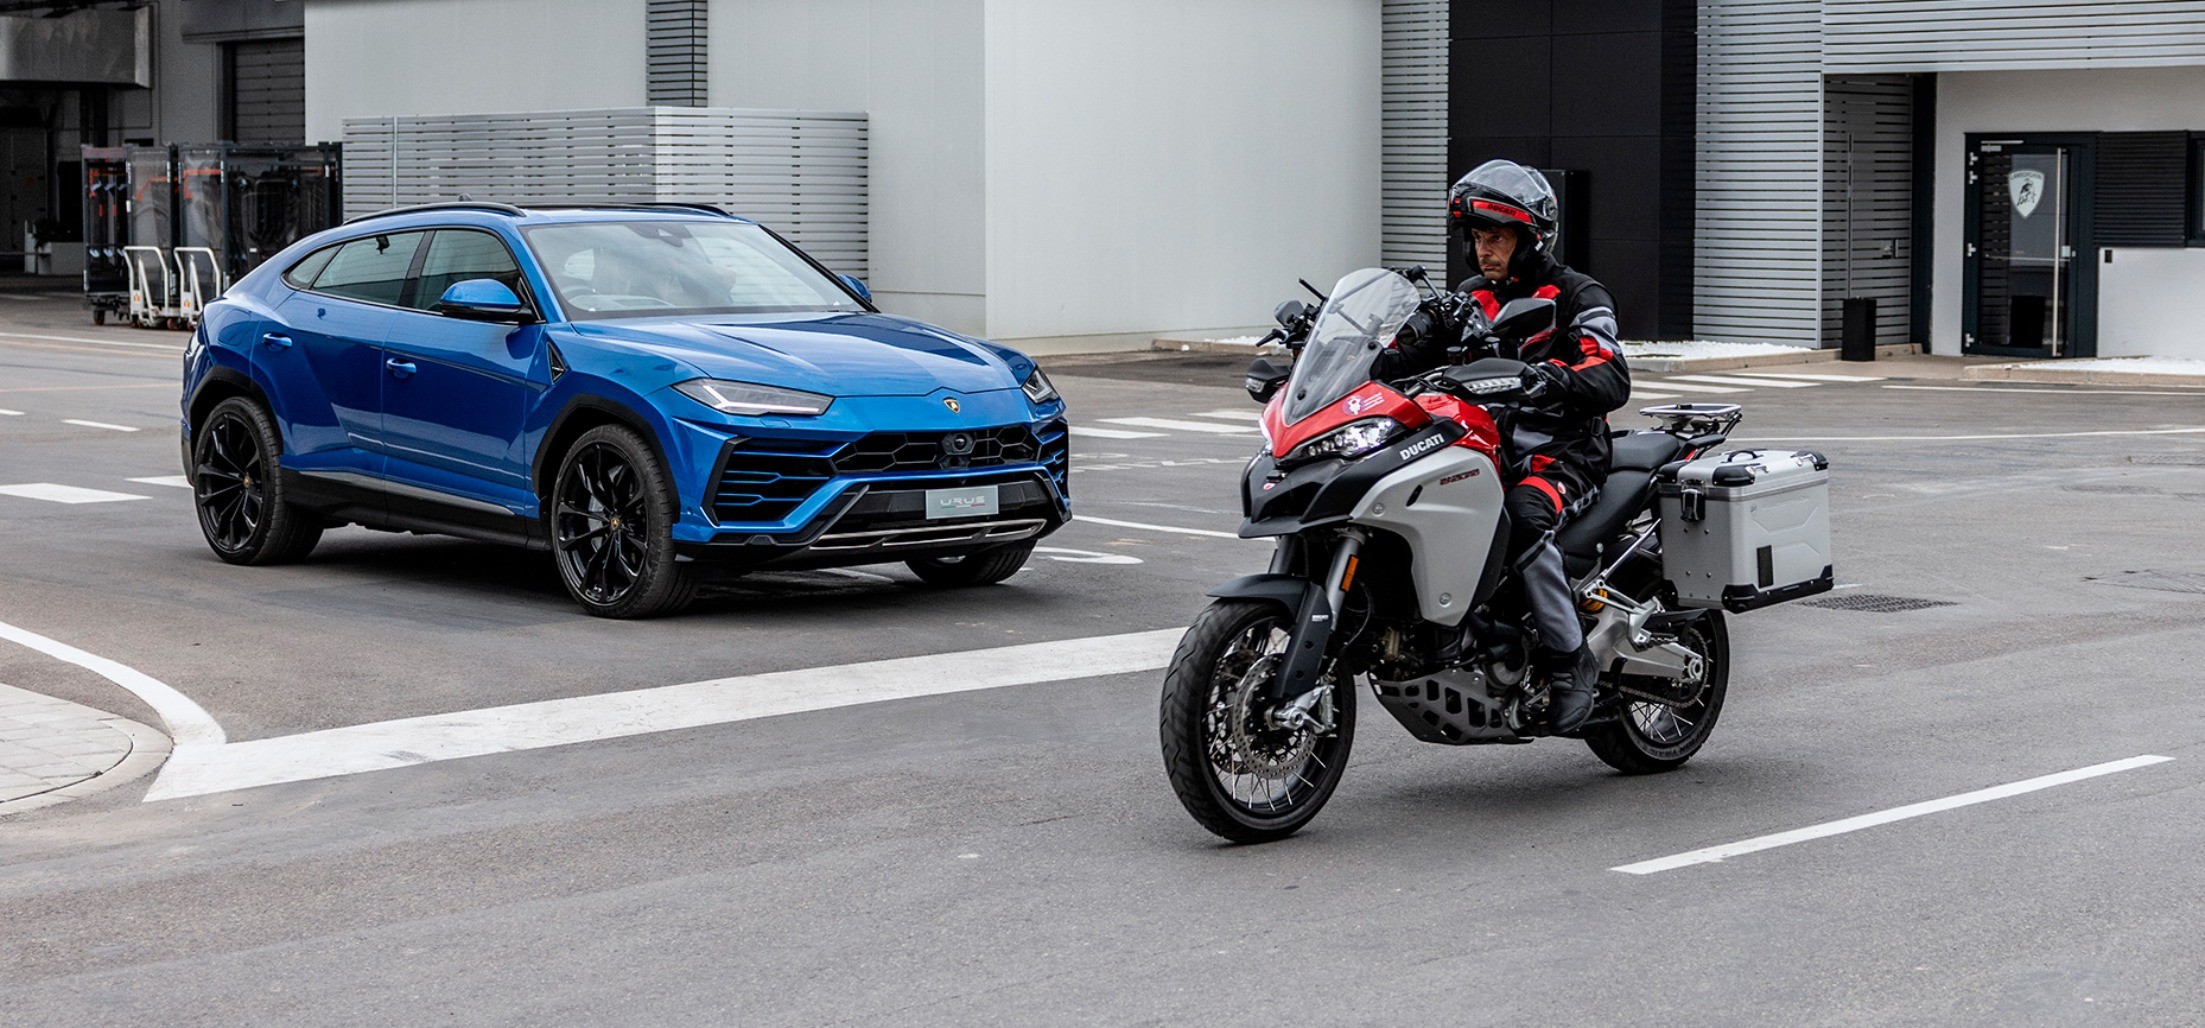 Ducati confirms its commitment to road safety at the Connected Motorcycle Consortium event